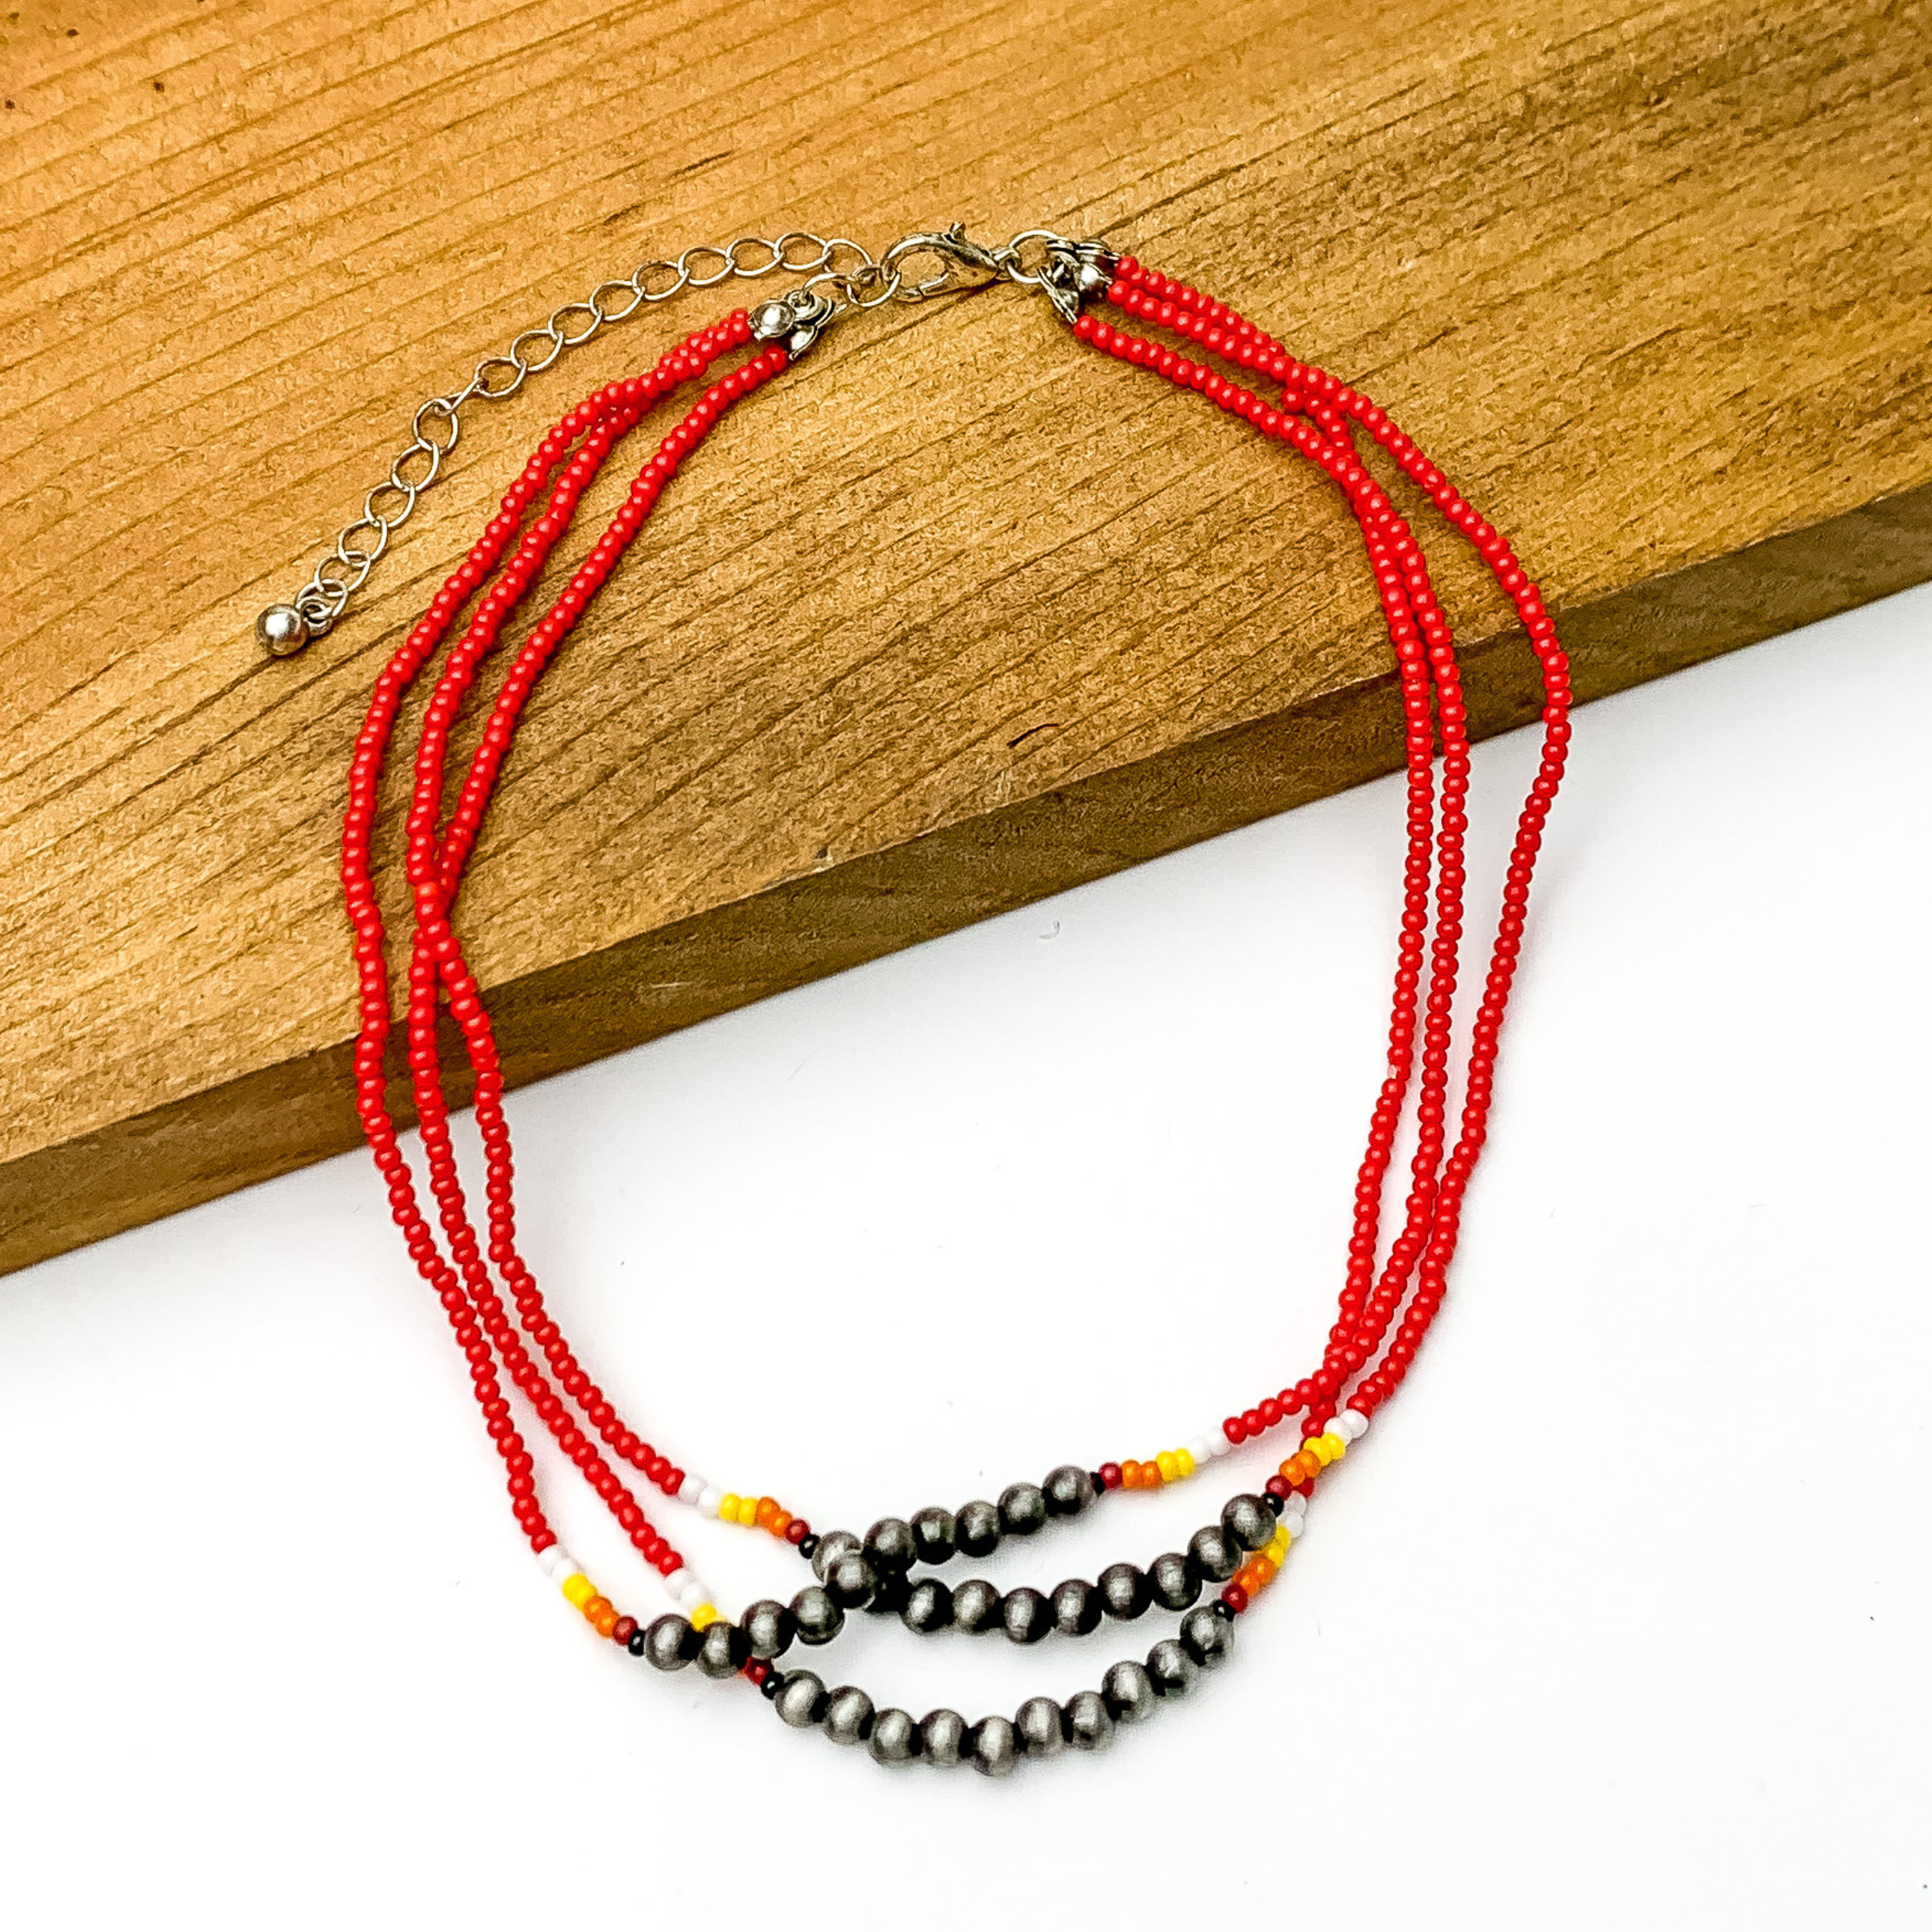 Three stranded necklace with mostly red beads. This necklace also includes a segment of silver beads on each strand with a couple white, red, and orange beads on each side of the segment. This necklace is pictured partially on a block of wood on a white background.  